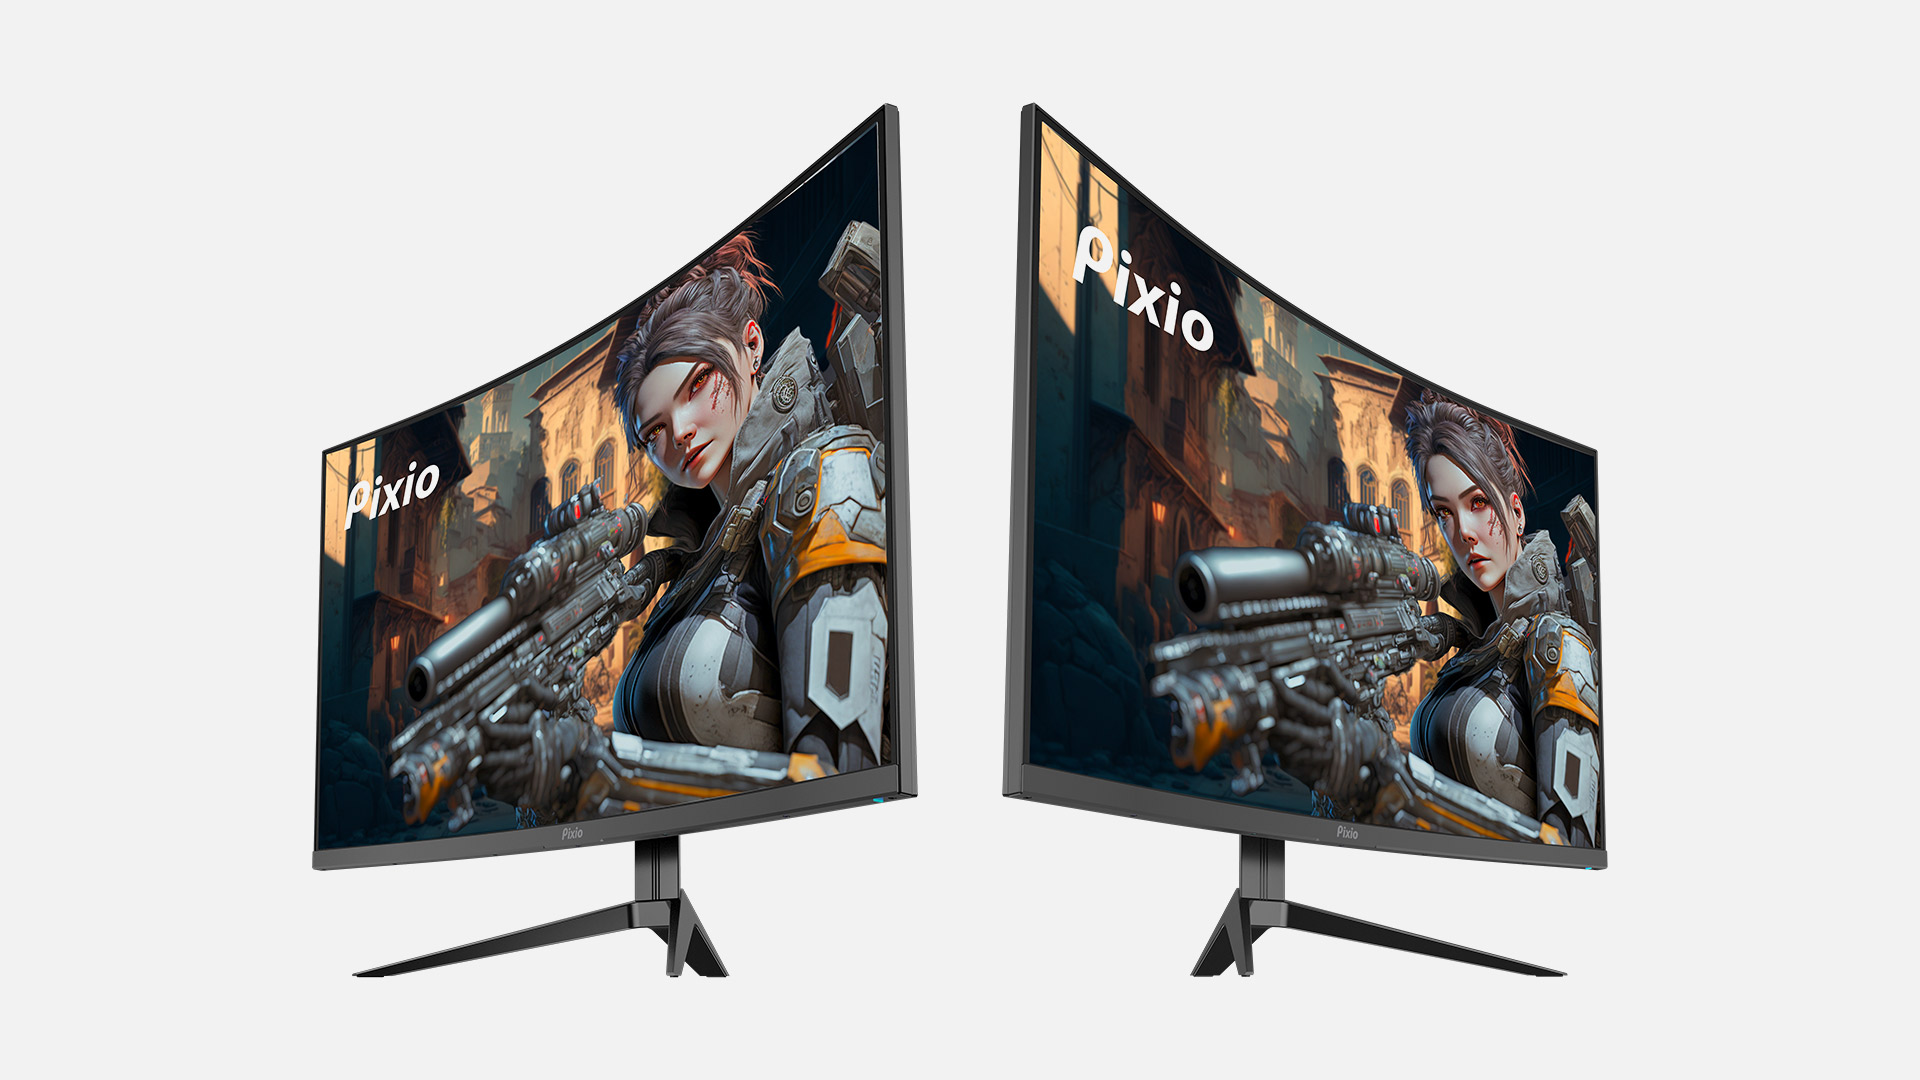 Pixio PXC277 Advanced Curved Gaming Monitor